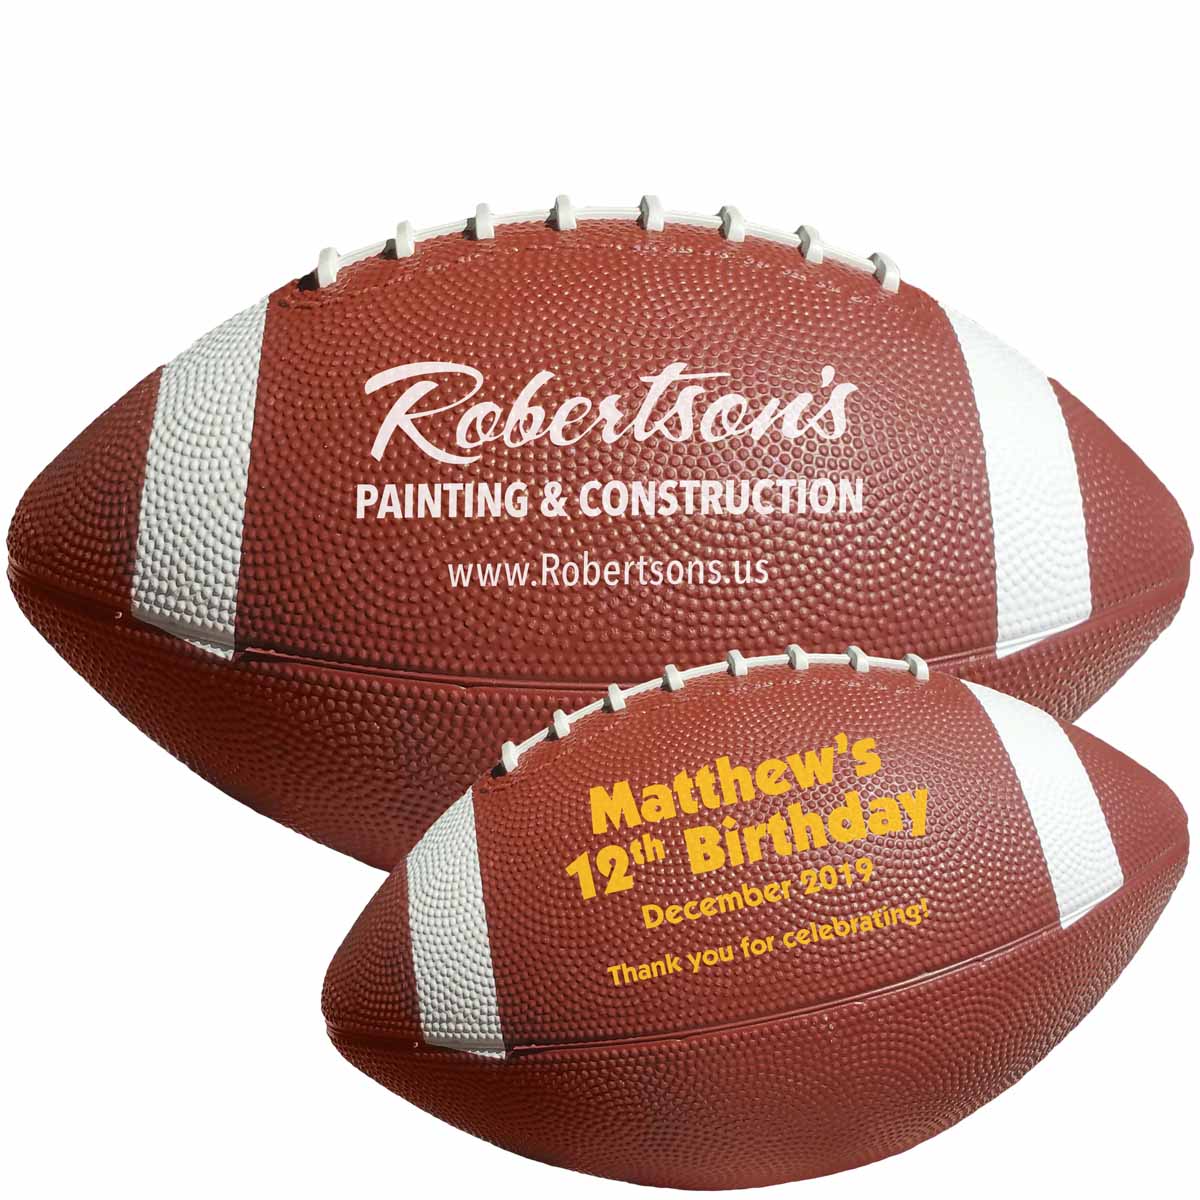 12 1/2" Rubber Footballs with White Stripes